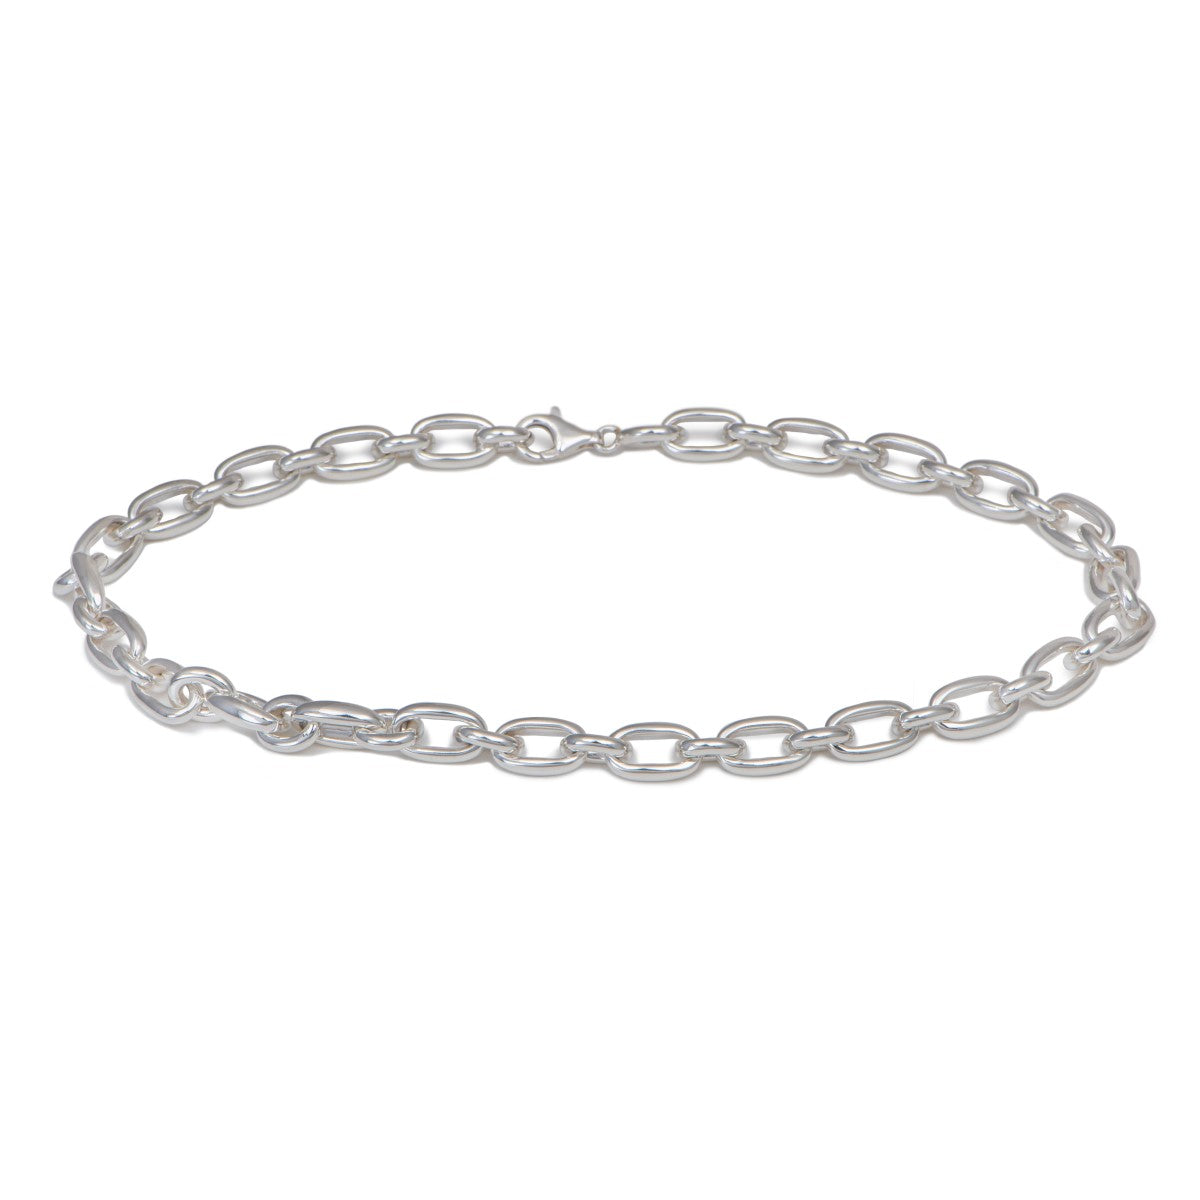 Statement Sterling Silver Link Necklace with Oval Links